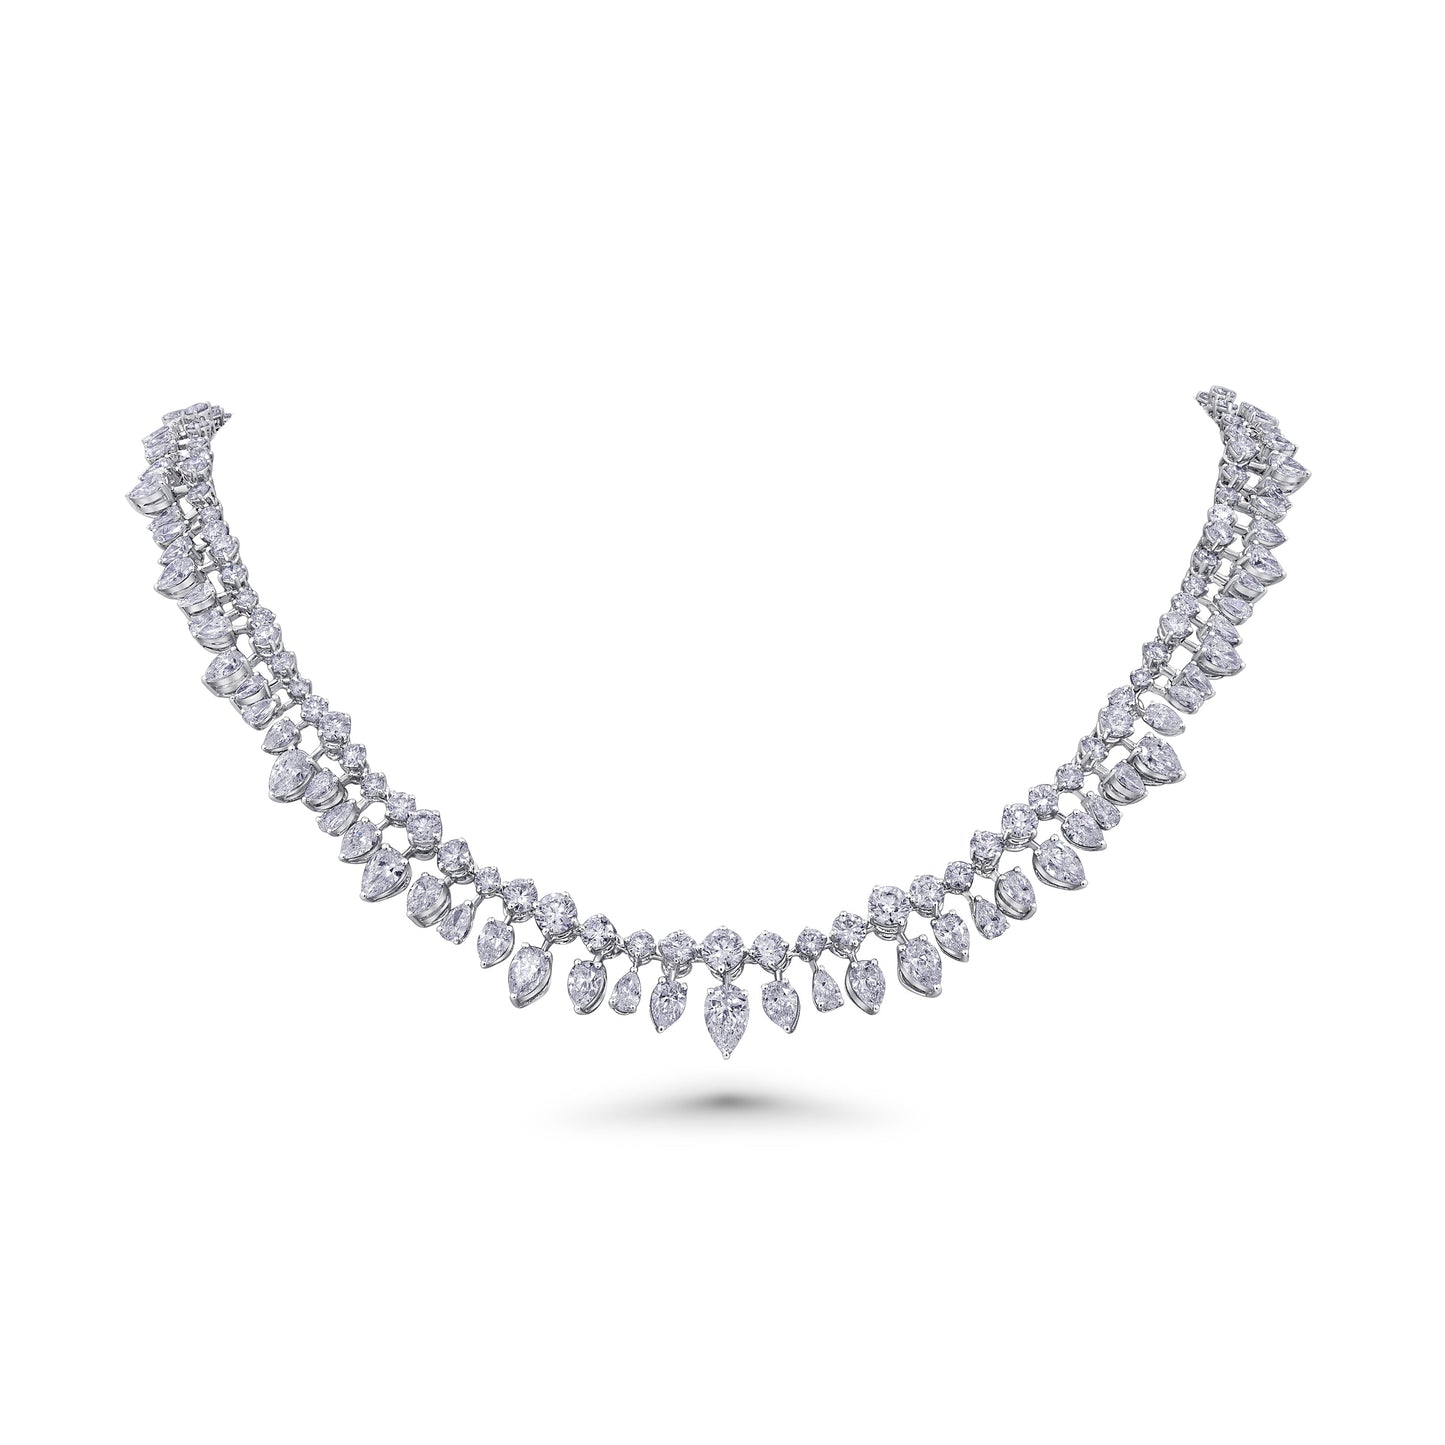 Pears & Rounds Diamond Statement Necklace